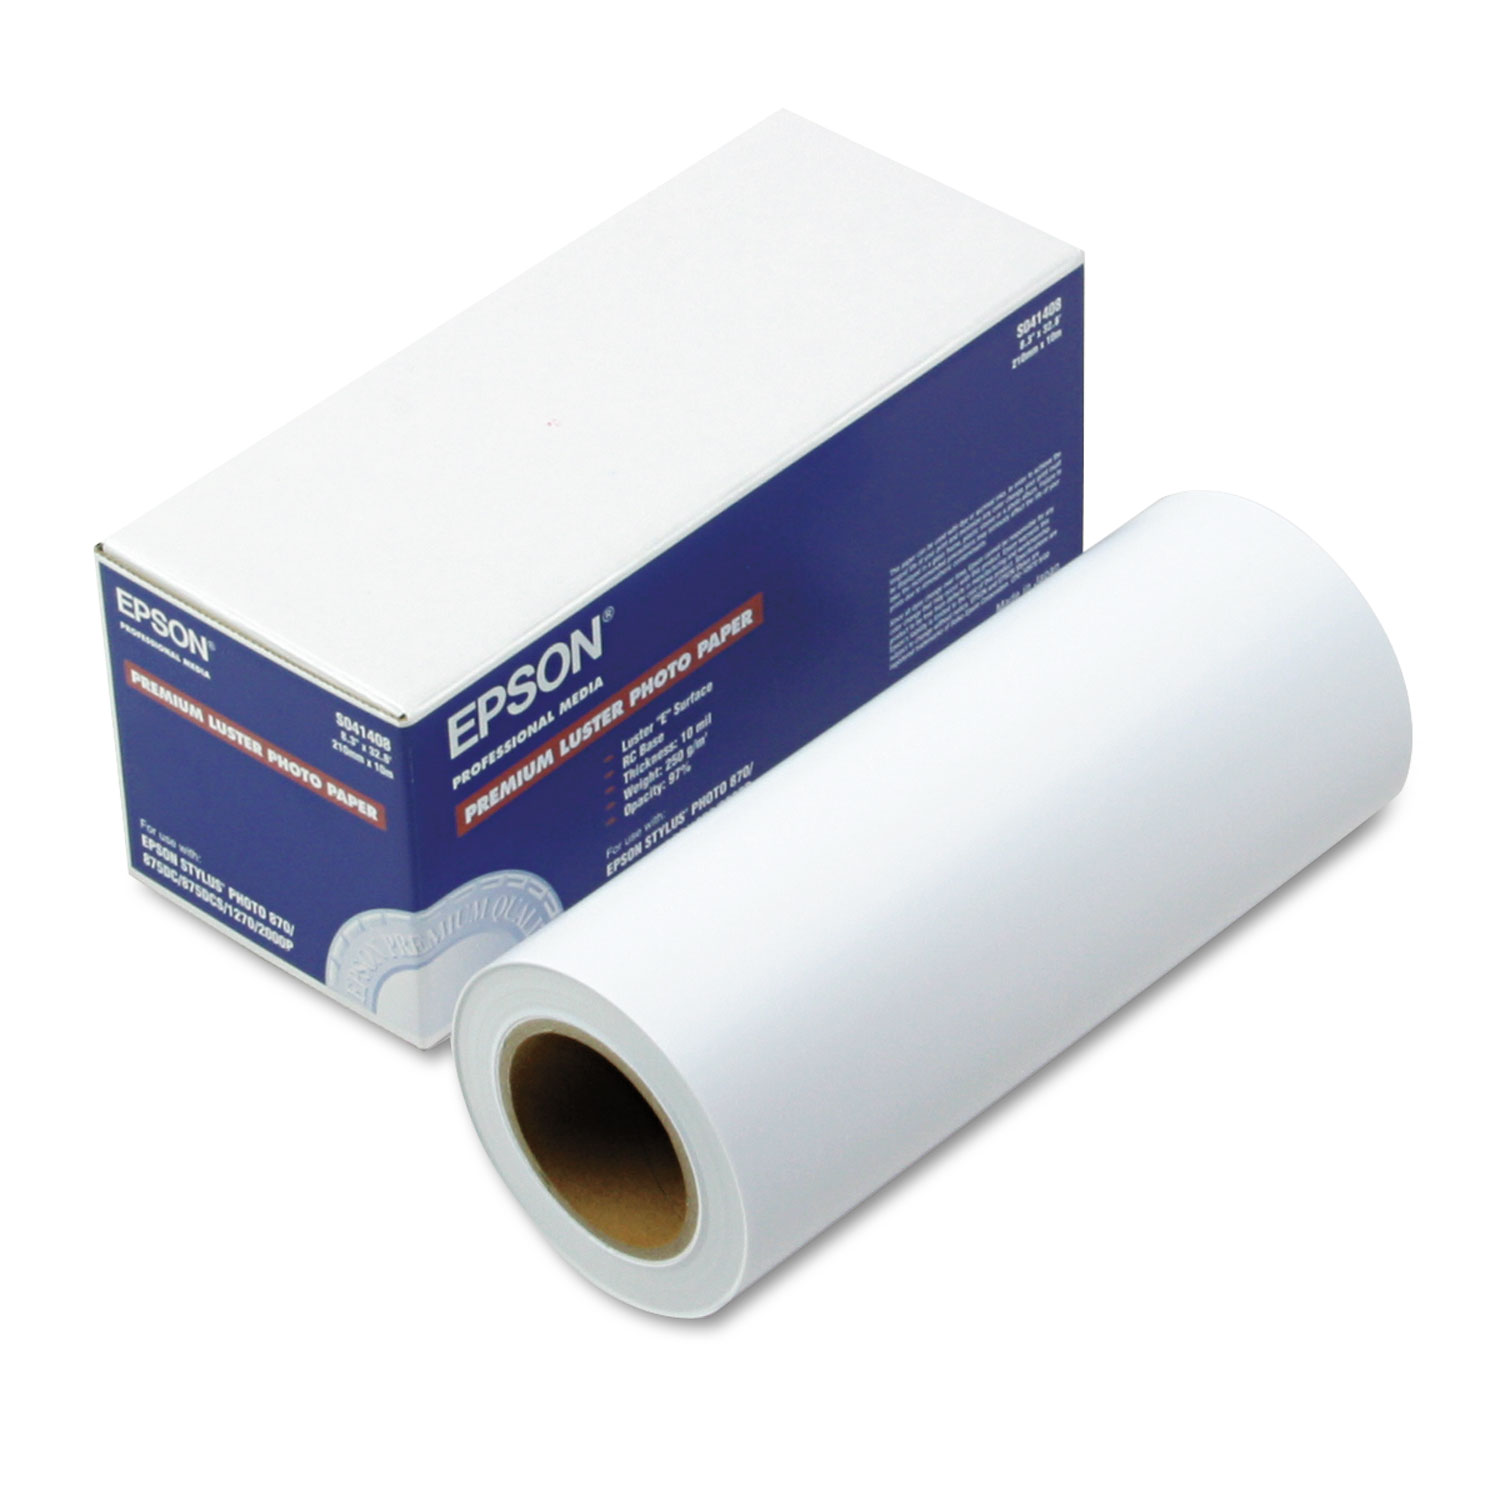 Ultra Premium Photo Paper, Luster, 8 x 32.8 ft, Roll